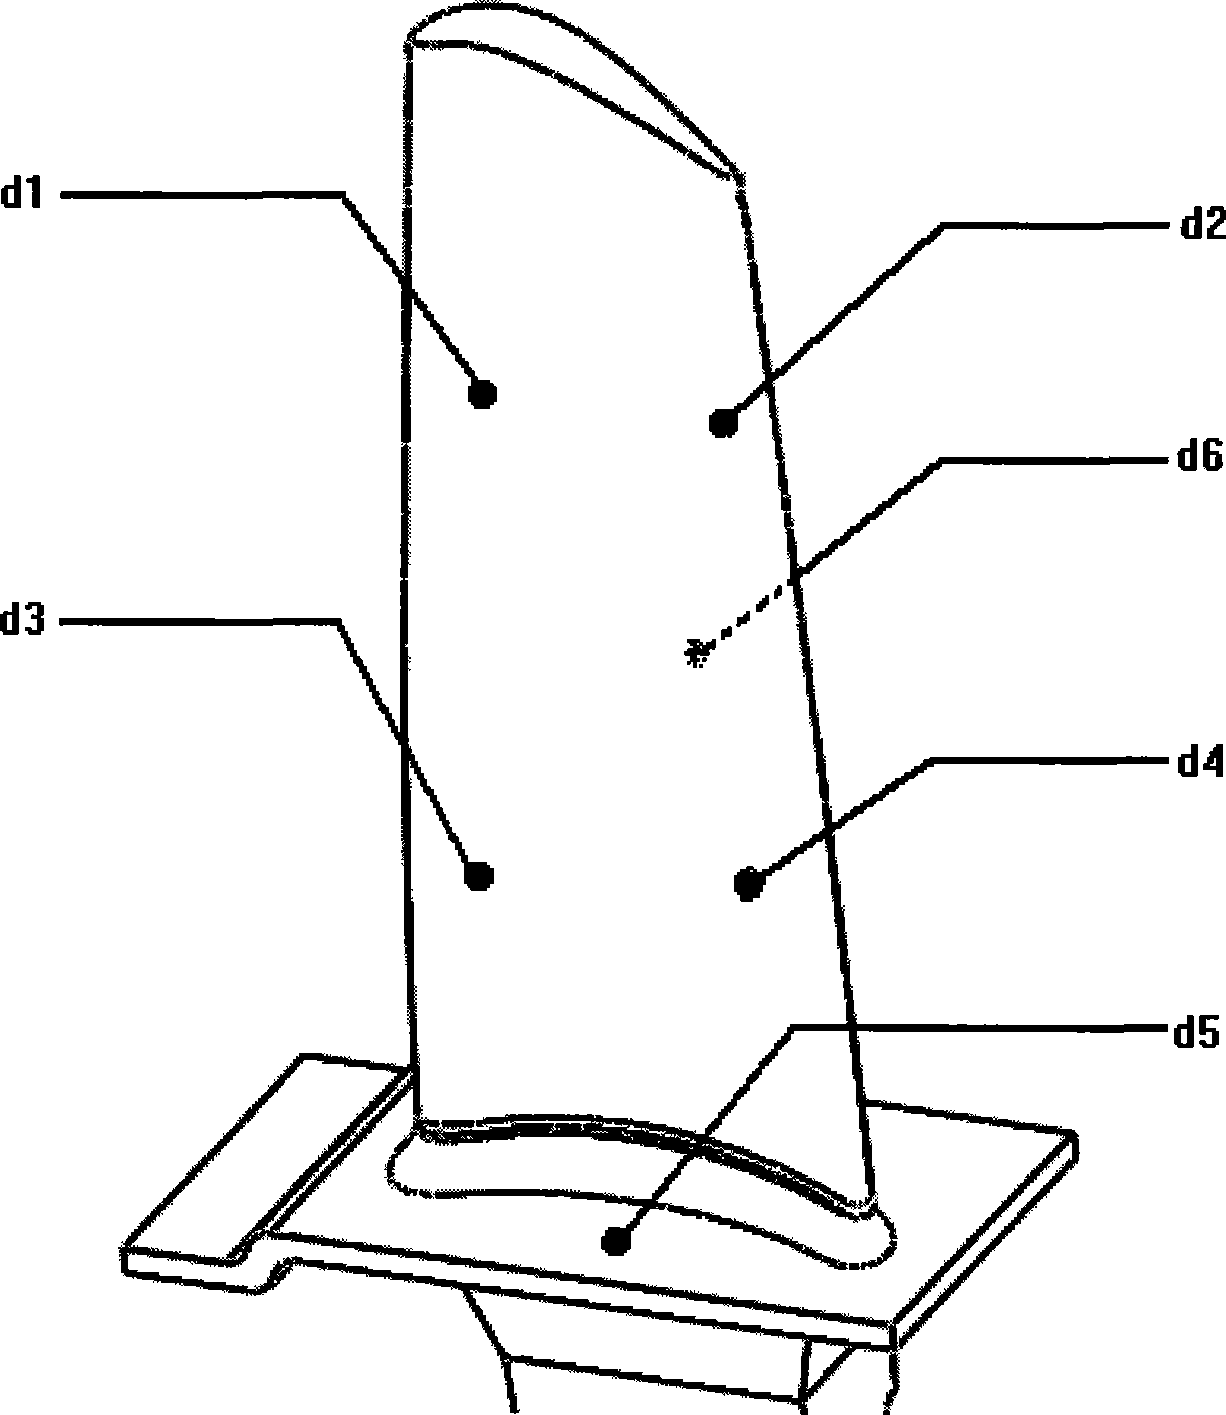 Turbine hollow blade rabbet processing locating clamping method and device